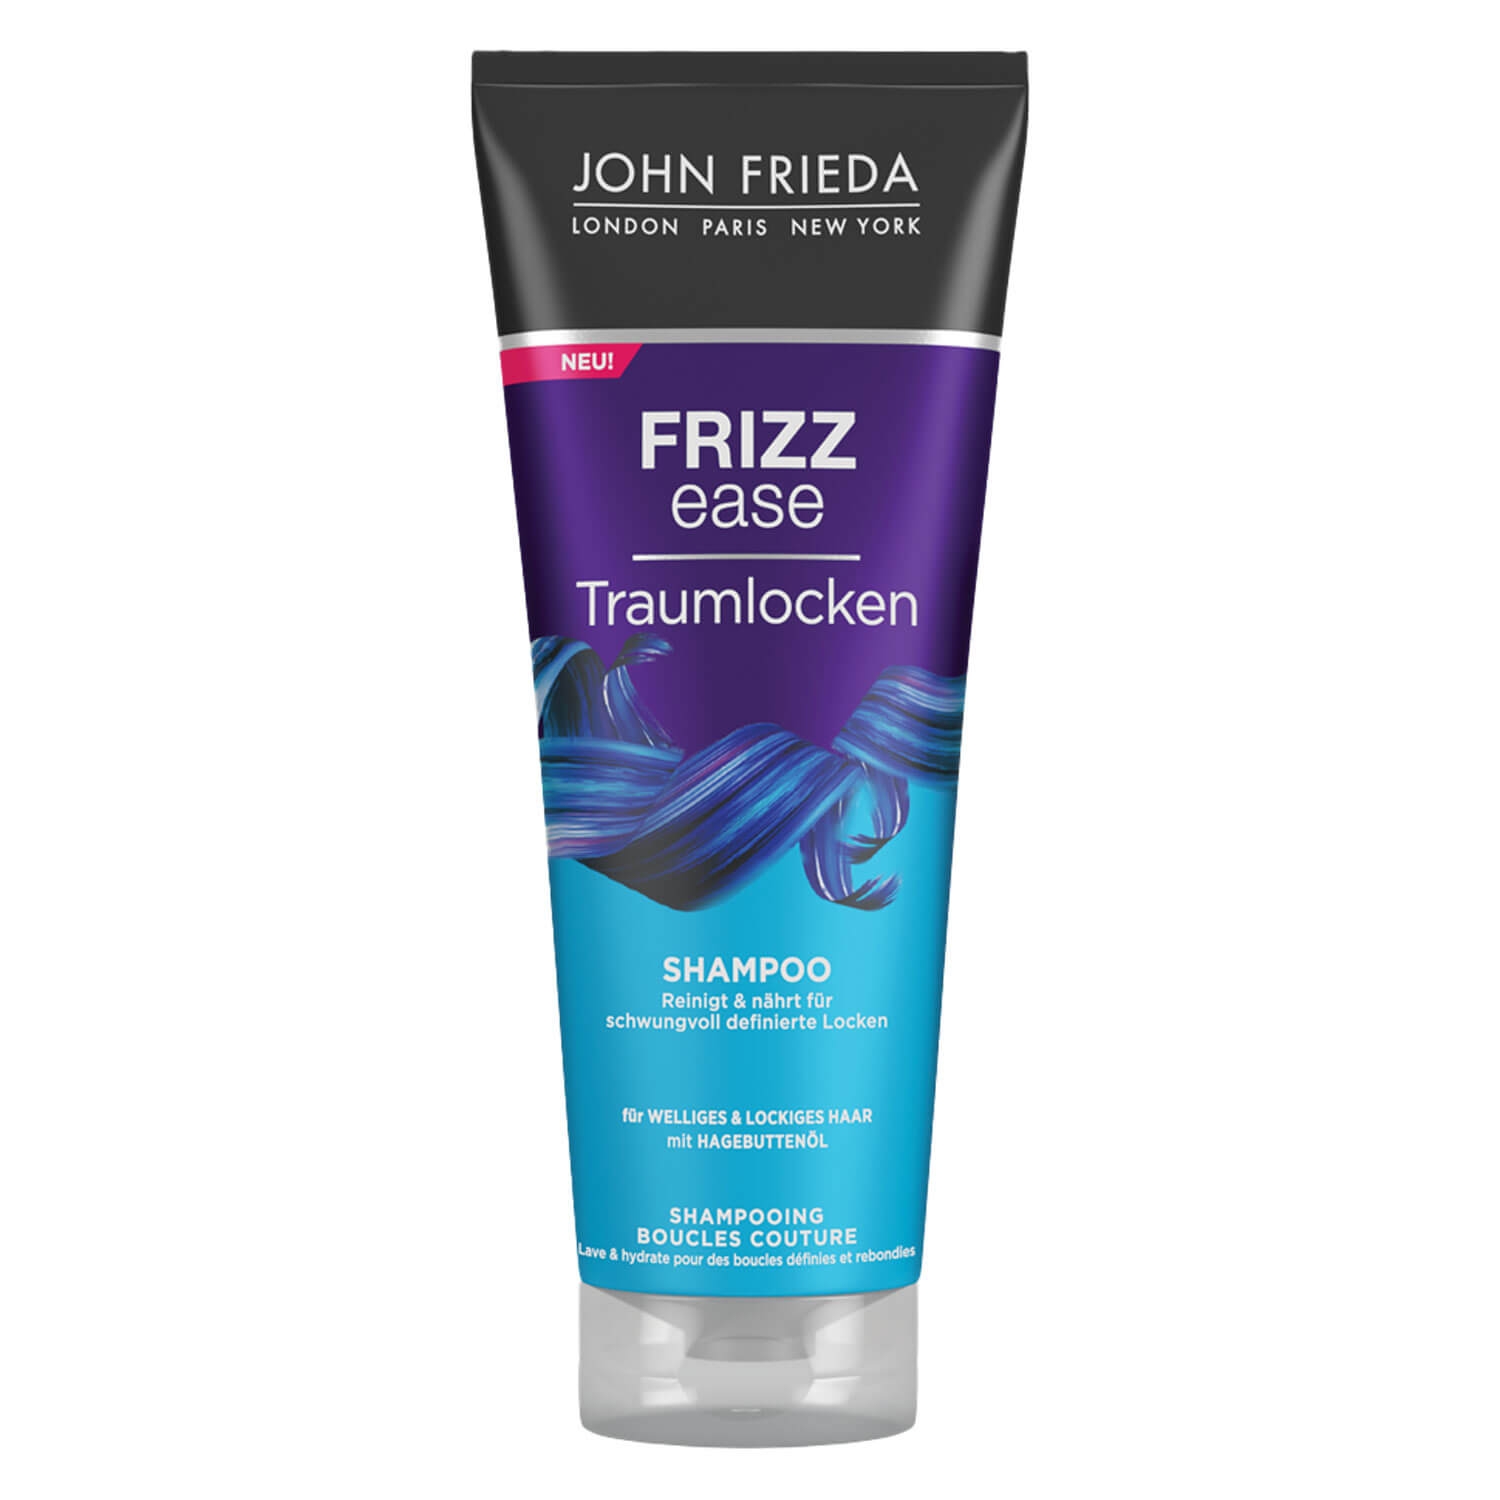 Product image from Frizz Ease - Traumlocken Shampoo